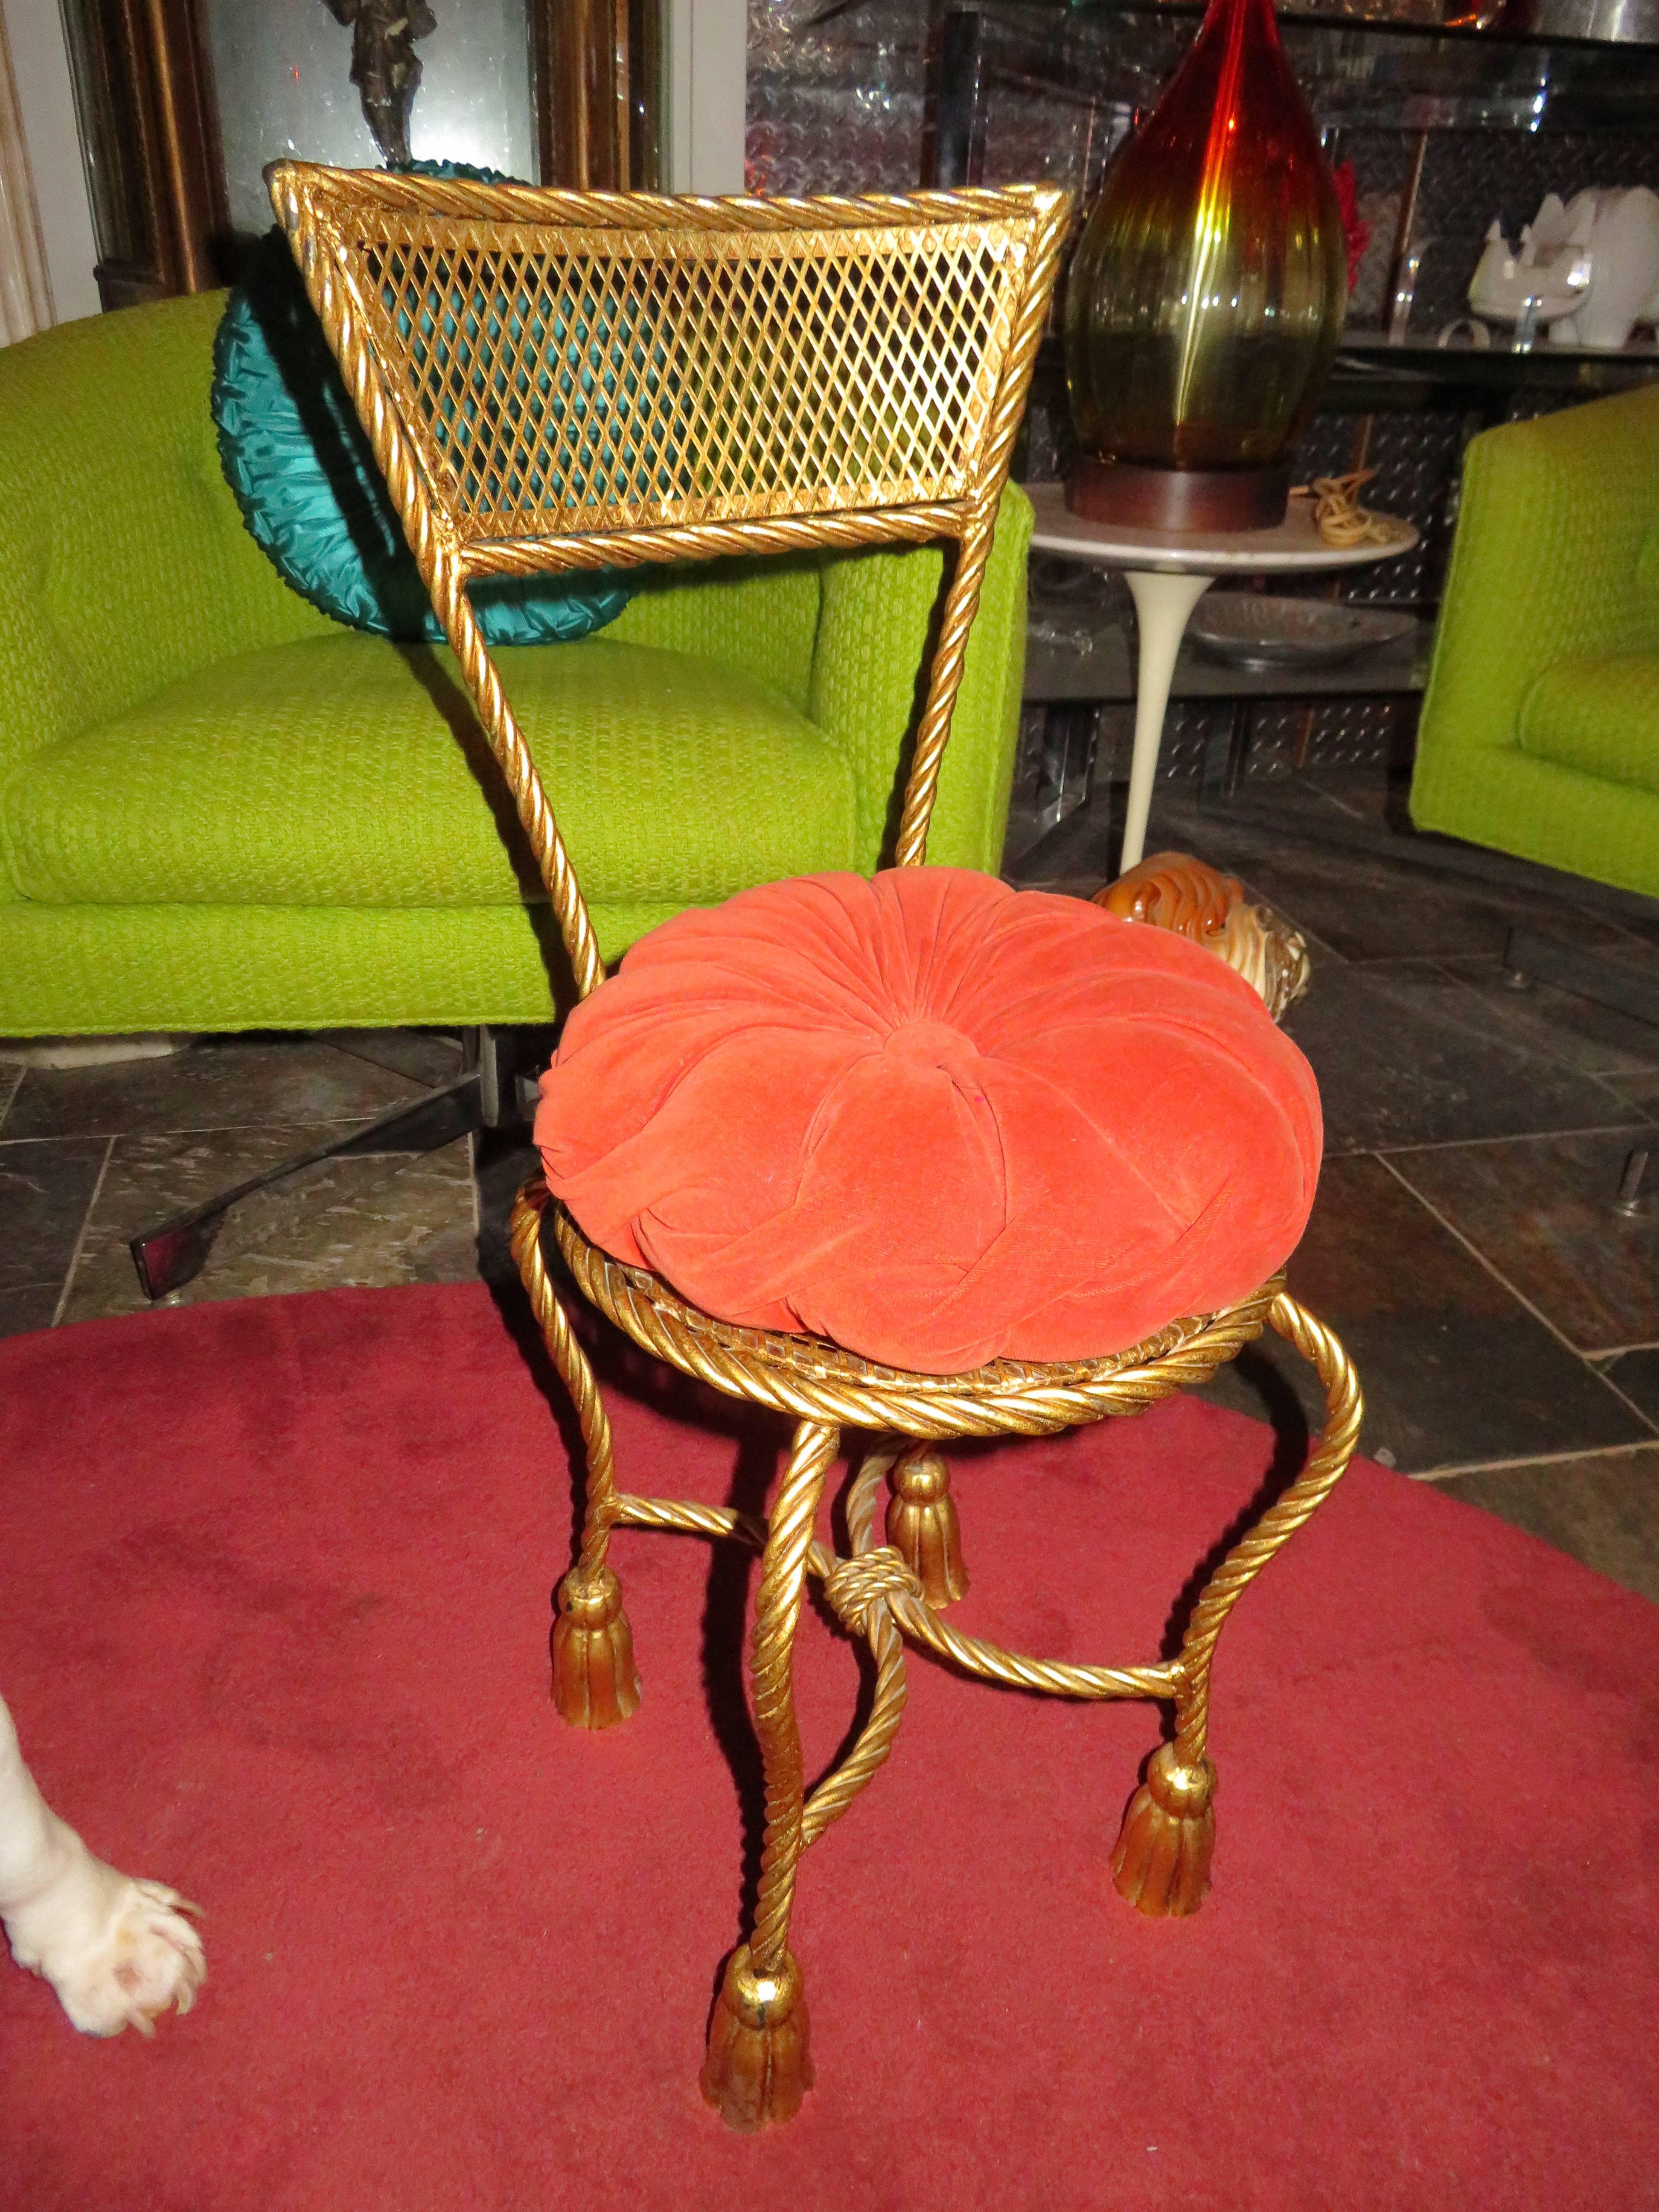 Lovely mid-20th century Italian gold gilt metal stool or vanity seat/chair with a 'rope and tassel' design and cute tufted seat cushion. This chair is petite in stature measuring 29